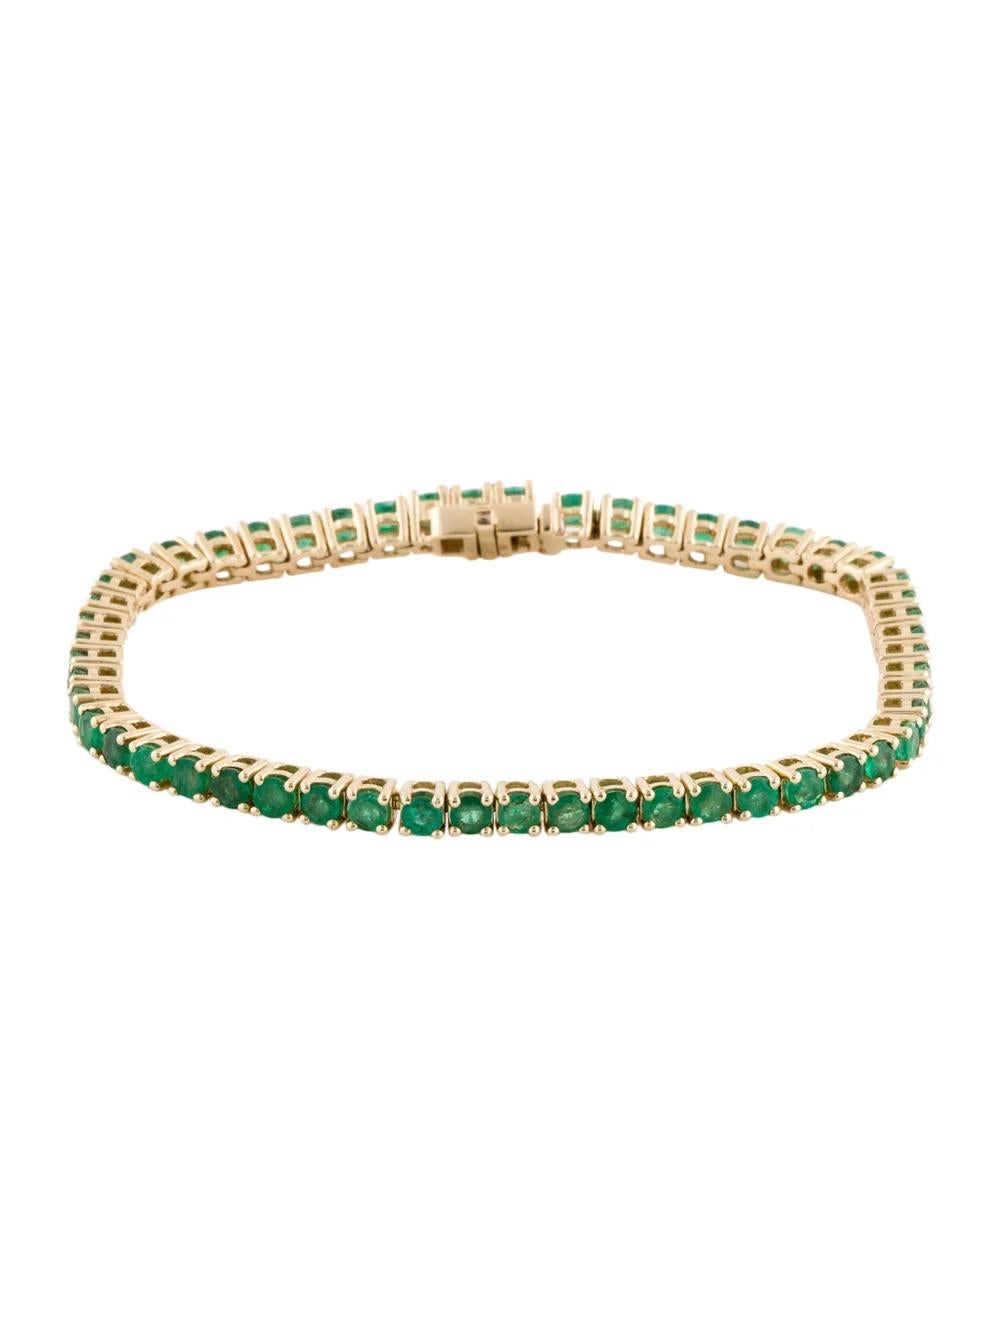 Elevate your jewelry collection with this exquisite 14K Yellow Gold Emerald Link Bracelet, adorned with a stunning 5.10 carat Round Modified Brilliant Emerald. Crafted with precision and attention to detail, this bracelet exudes elegance and